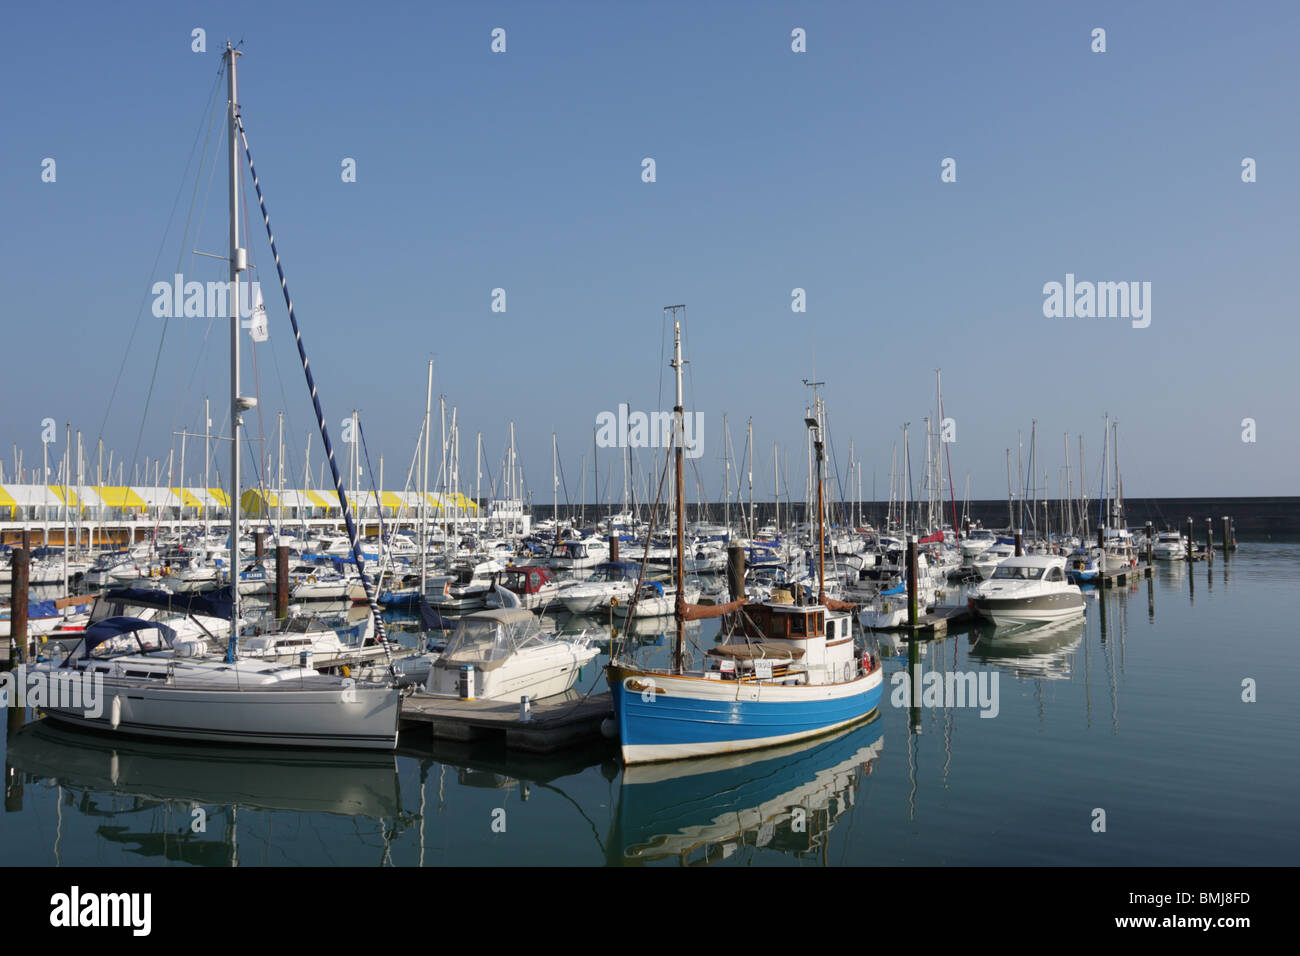 One of (17) images in the Brighton Marina set. various vertical and horizontal images to ponder over, please enjoy. Stock Photo